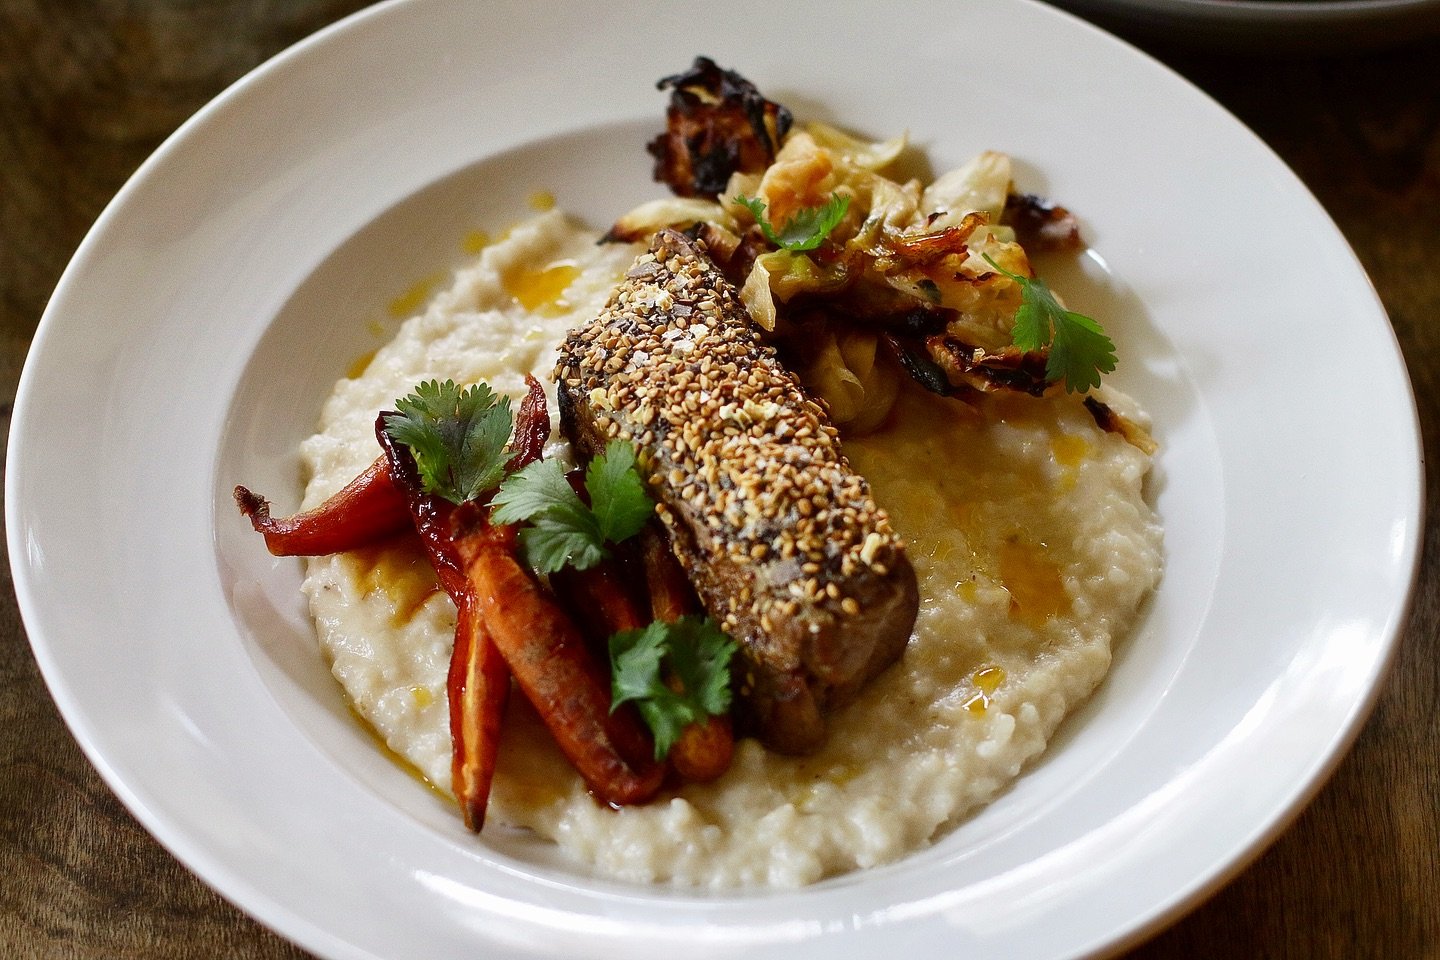 Beef Short Rib 🤭 Deboned, seared, and braised, then topped with Mexican everything spice. Served with Carolina Gold rice grits finished with guajillo oil, poached carrots, and fried cabbage. 

Try it tonight when 20% of sales go towards Athens Commu